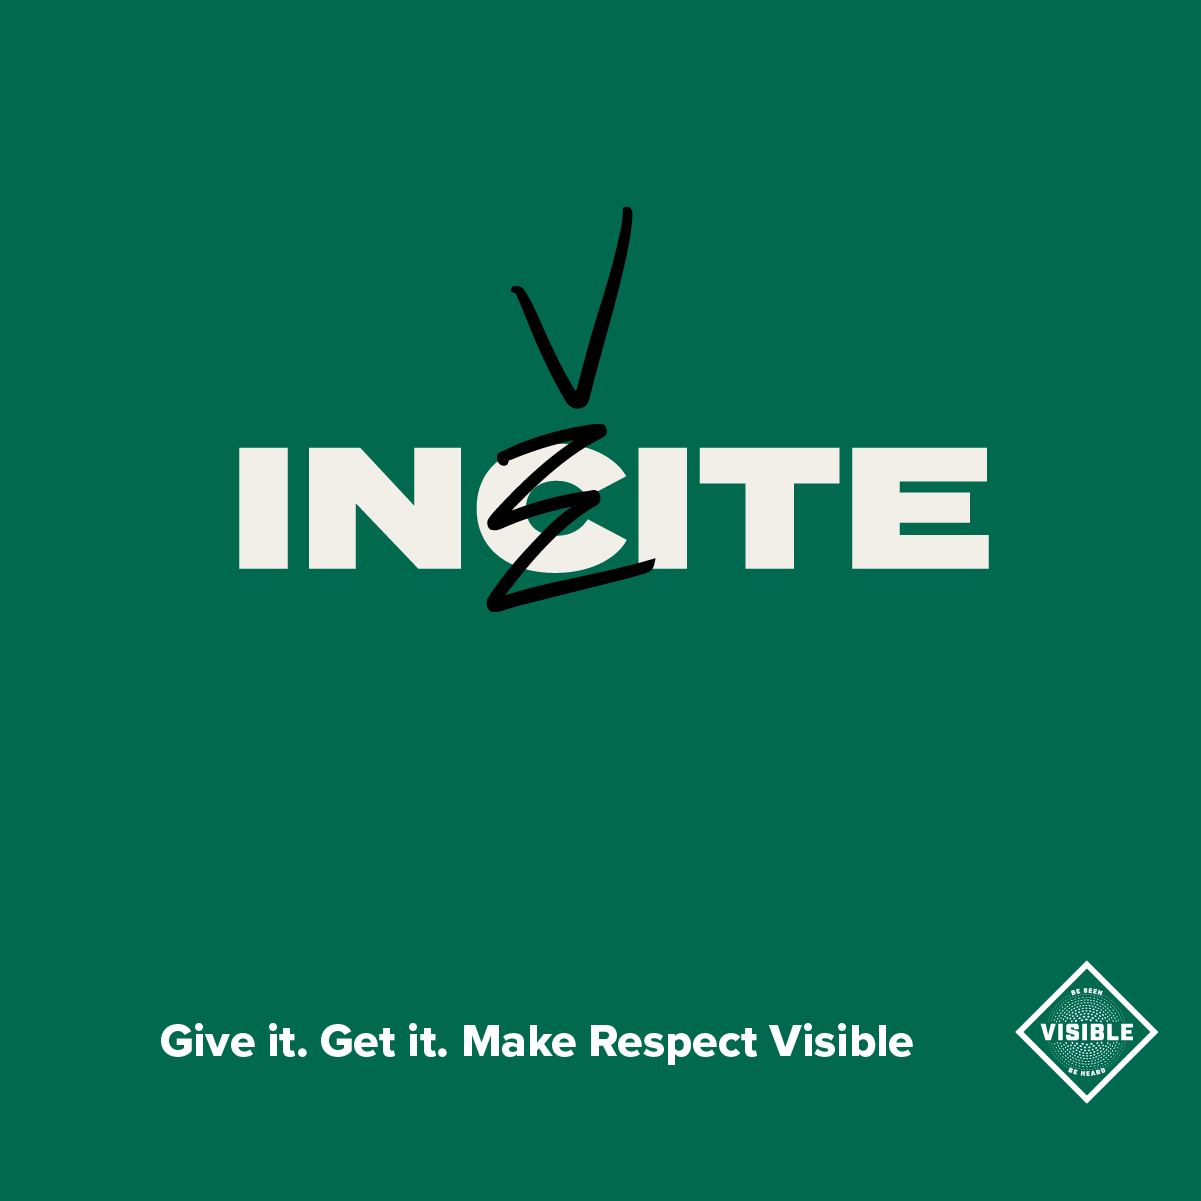 The word "incite" has the c scratched out and changed to a v, so it reads "invite"